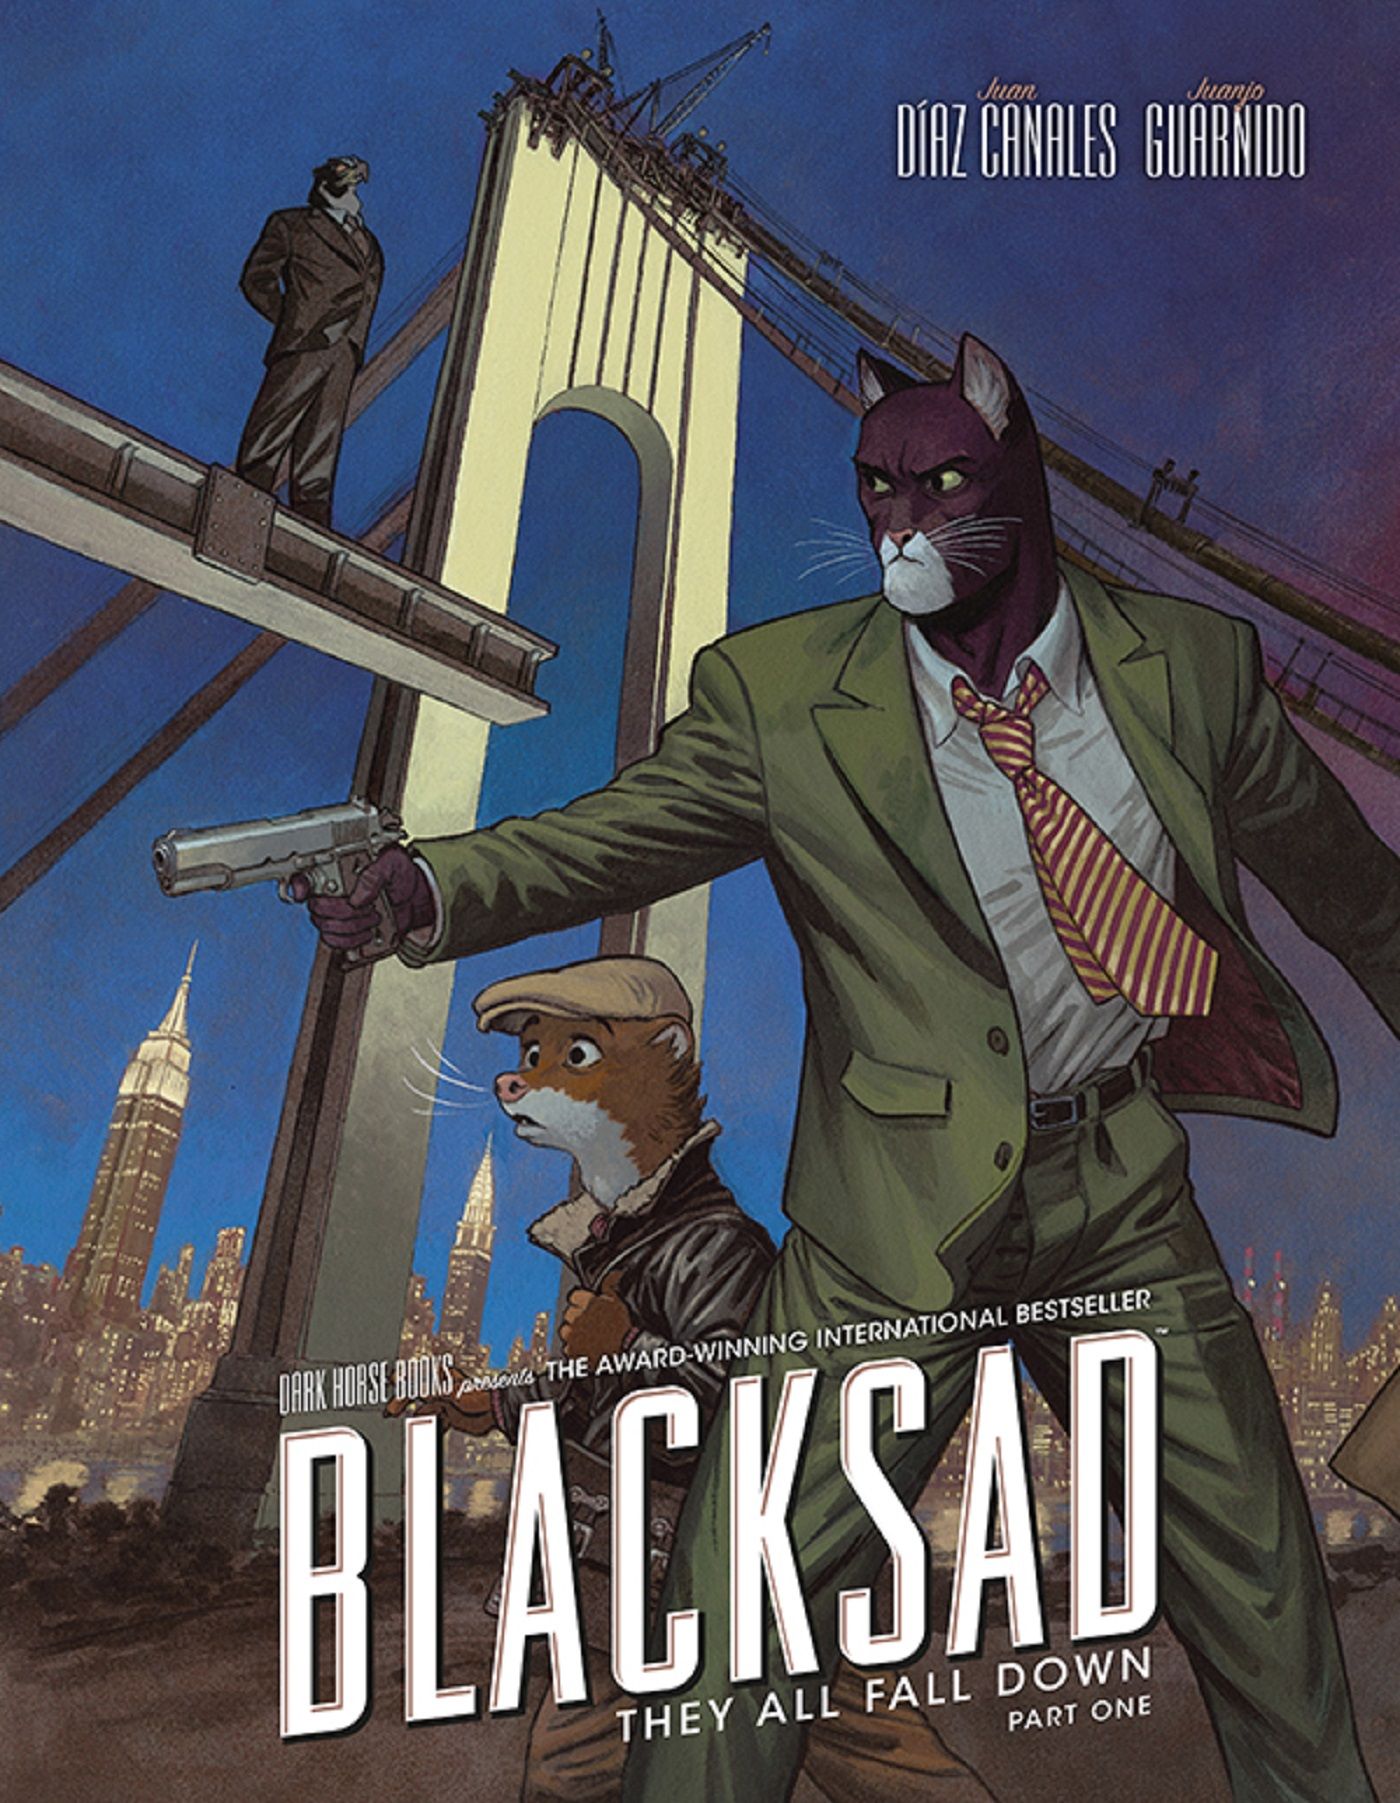 Blacksad They All Fall Down Part One Cover